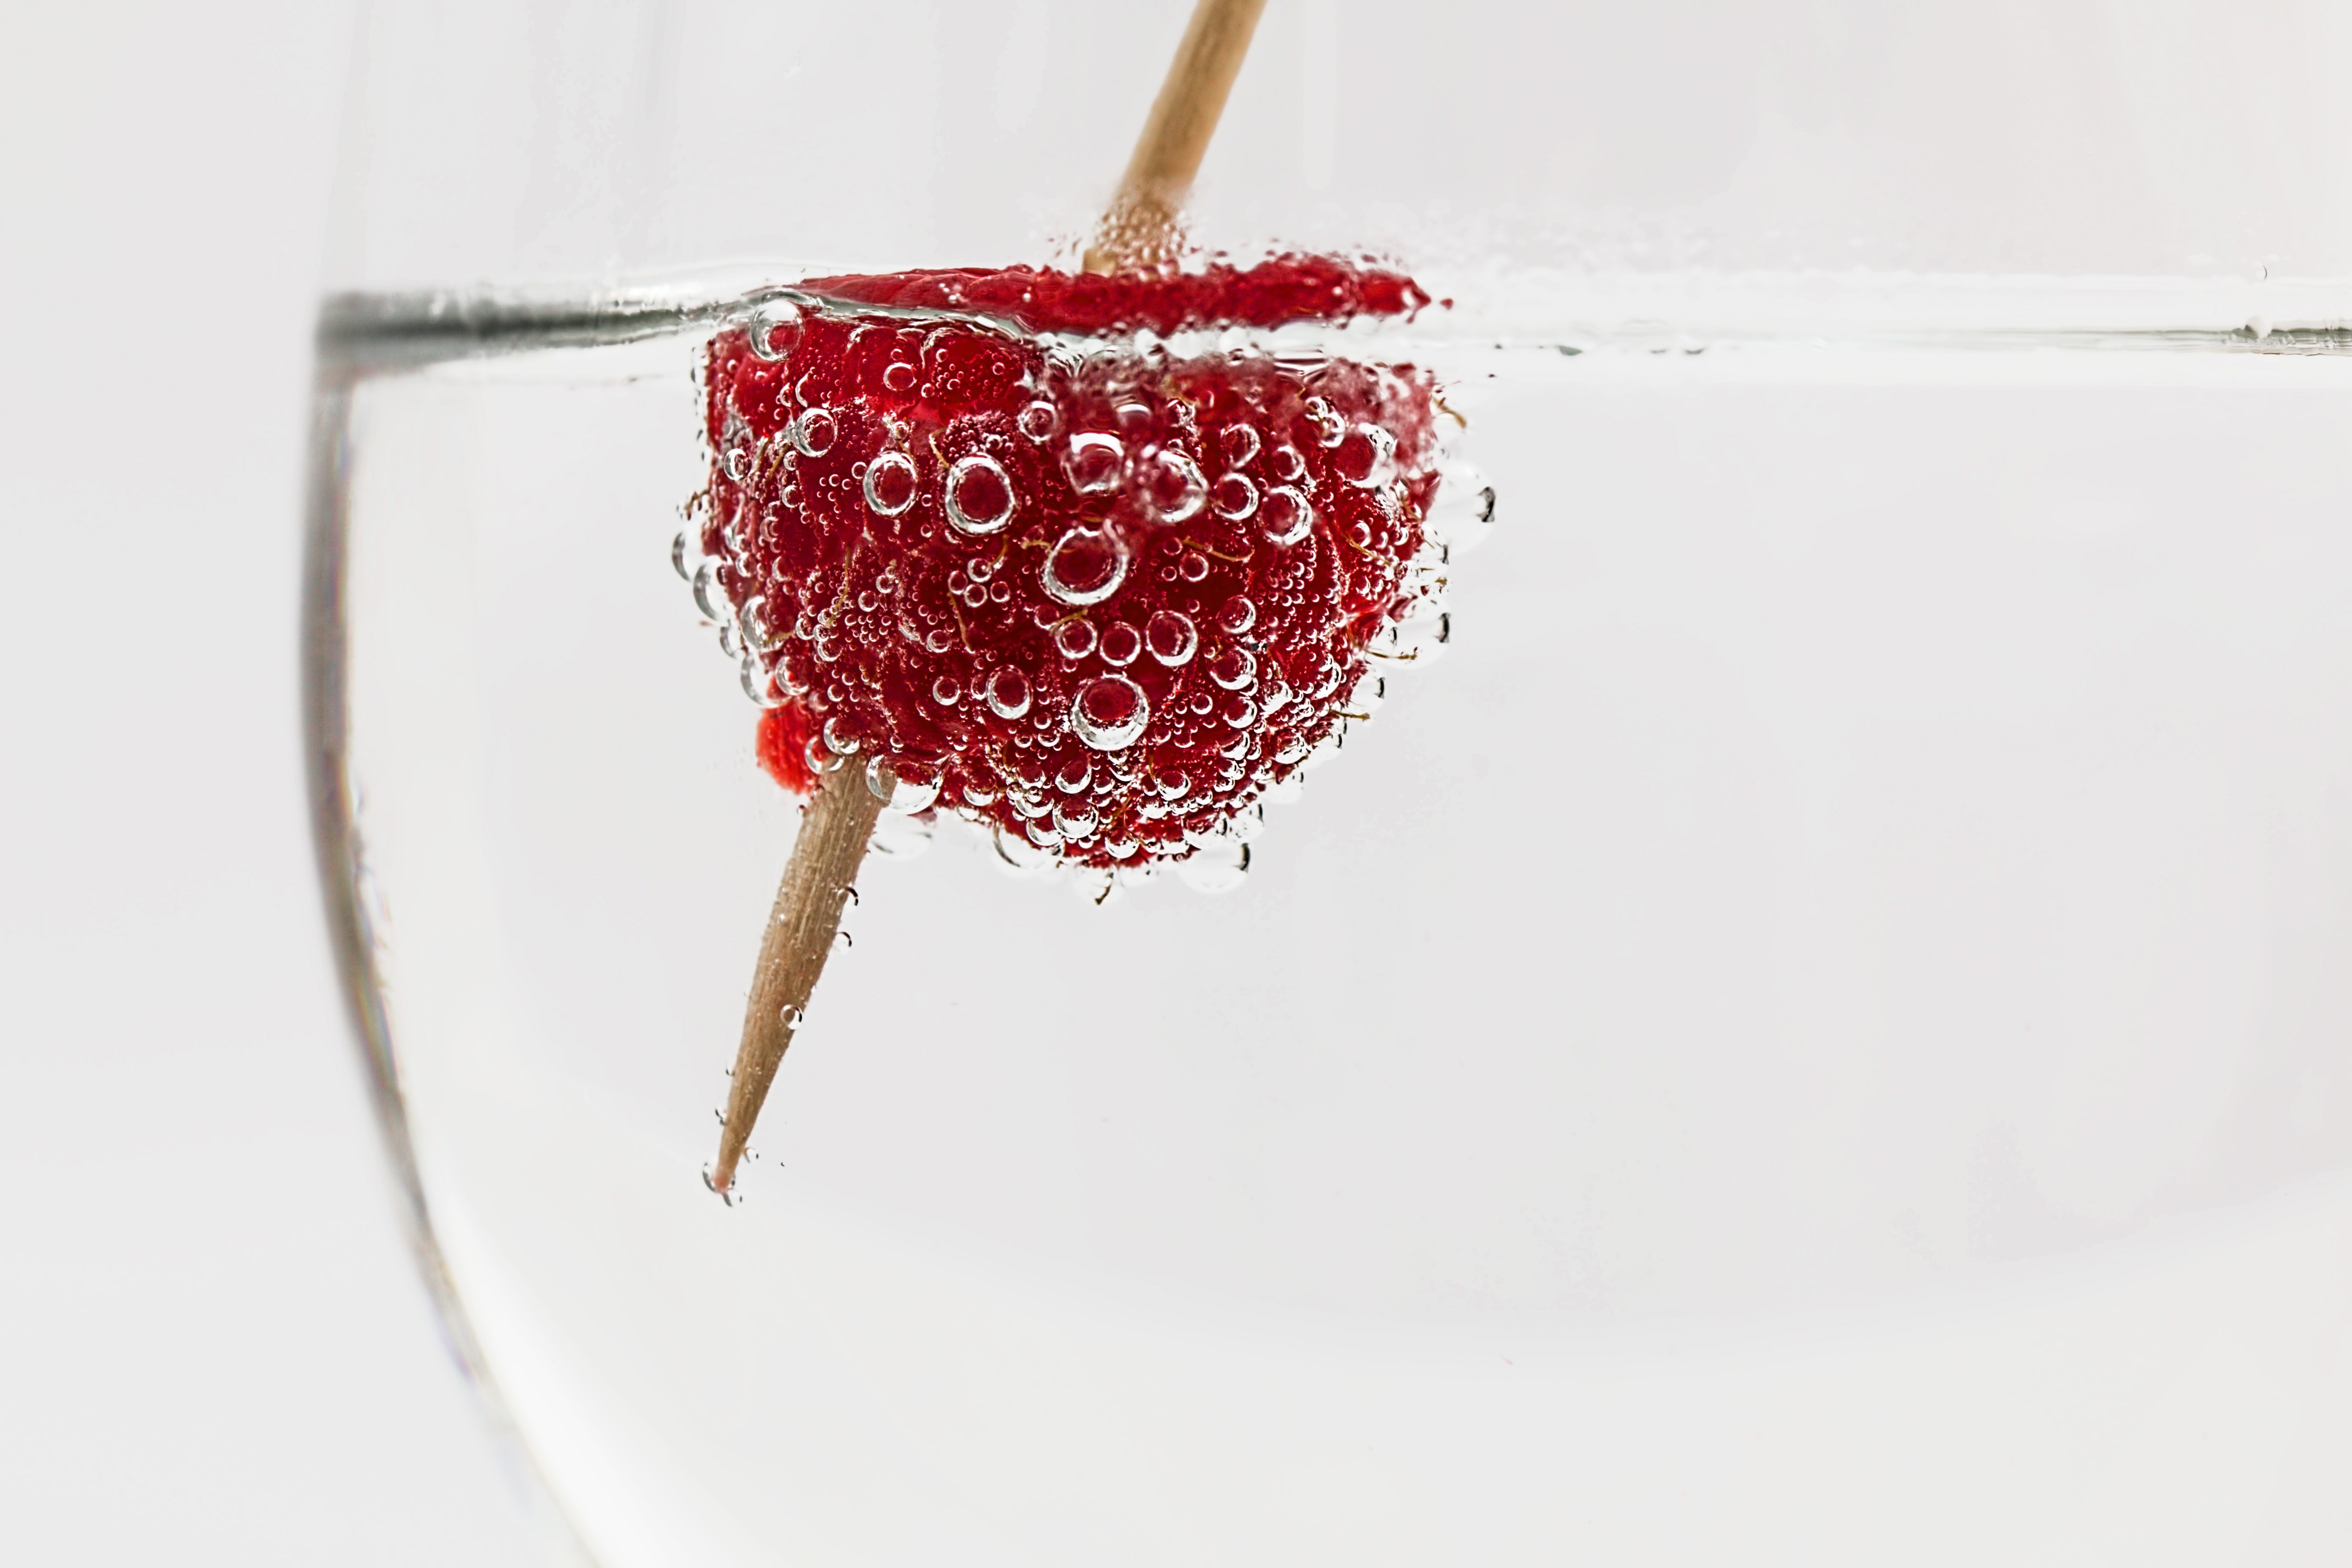 Red raspberry on water with brown stick photo